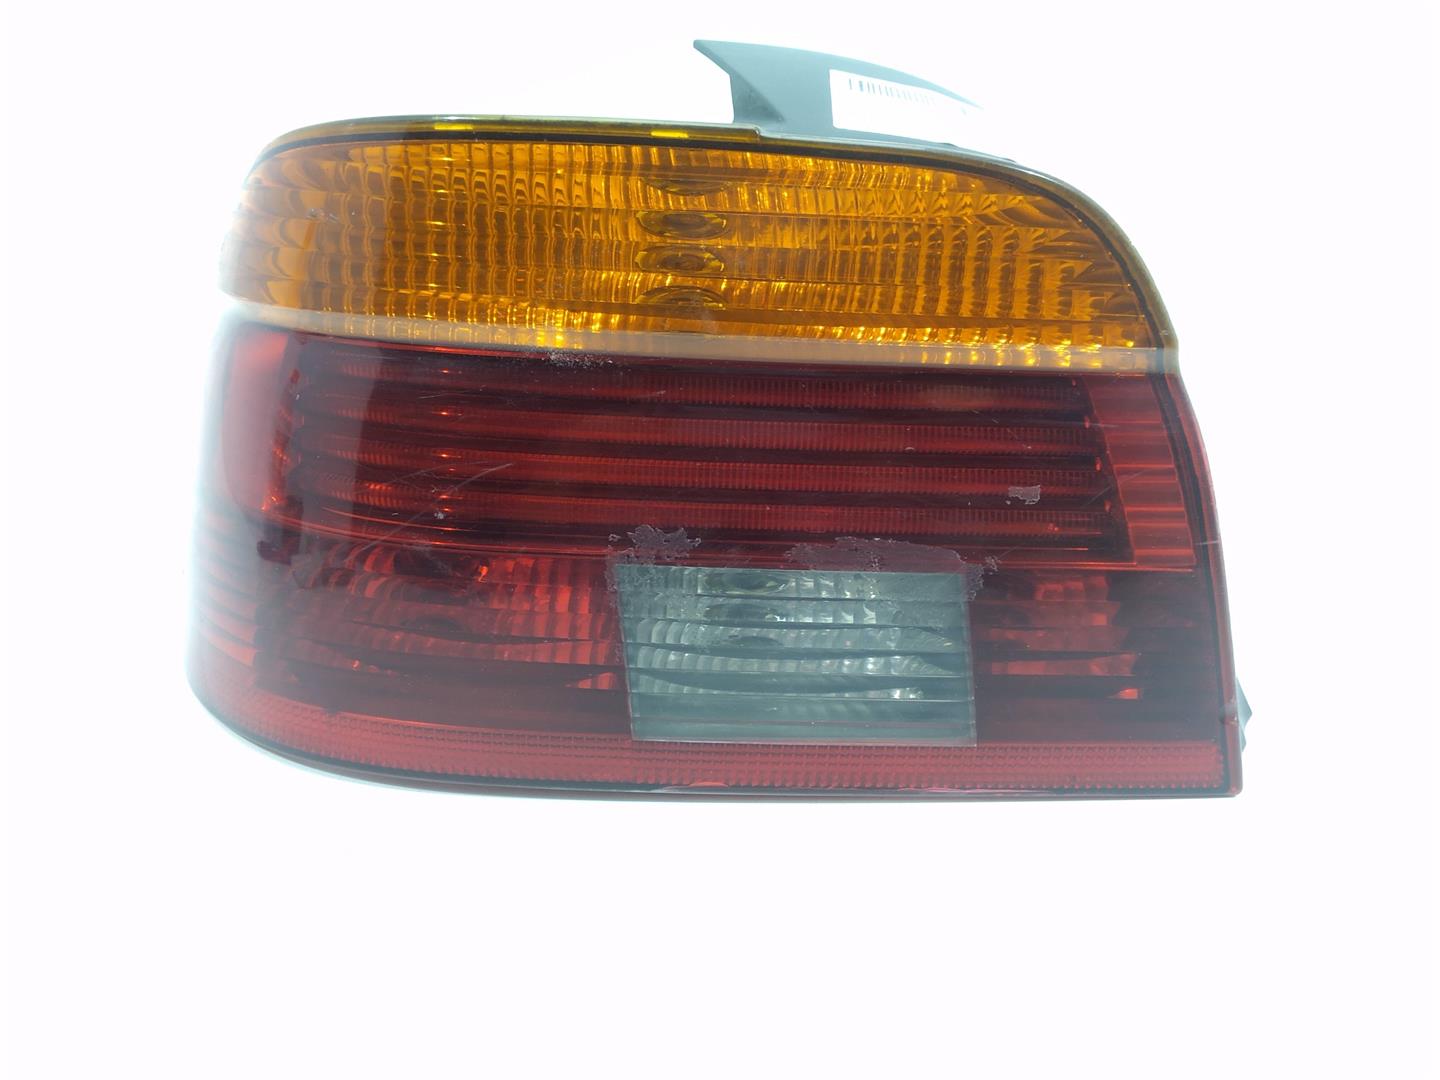 BMW 5 Series E39 (1995-2004) Rear Left Taillight 63216900209, 63216900209, 63216900209 19328368